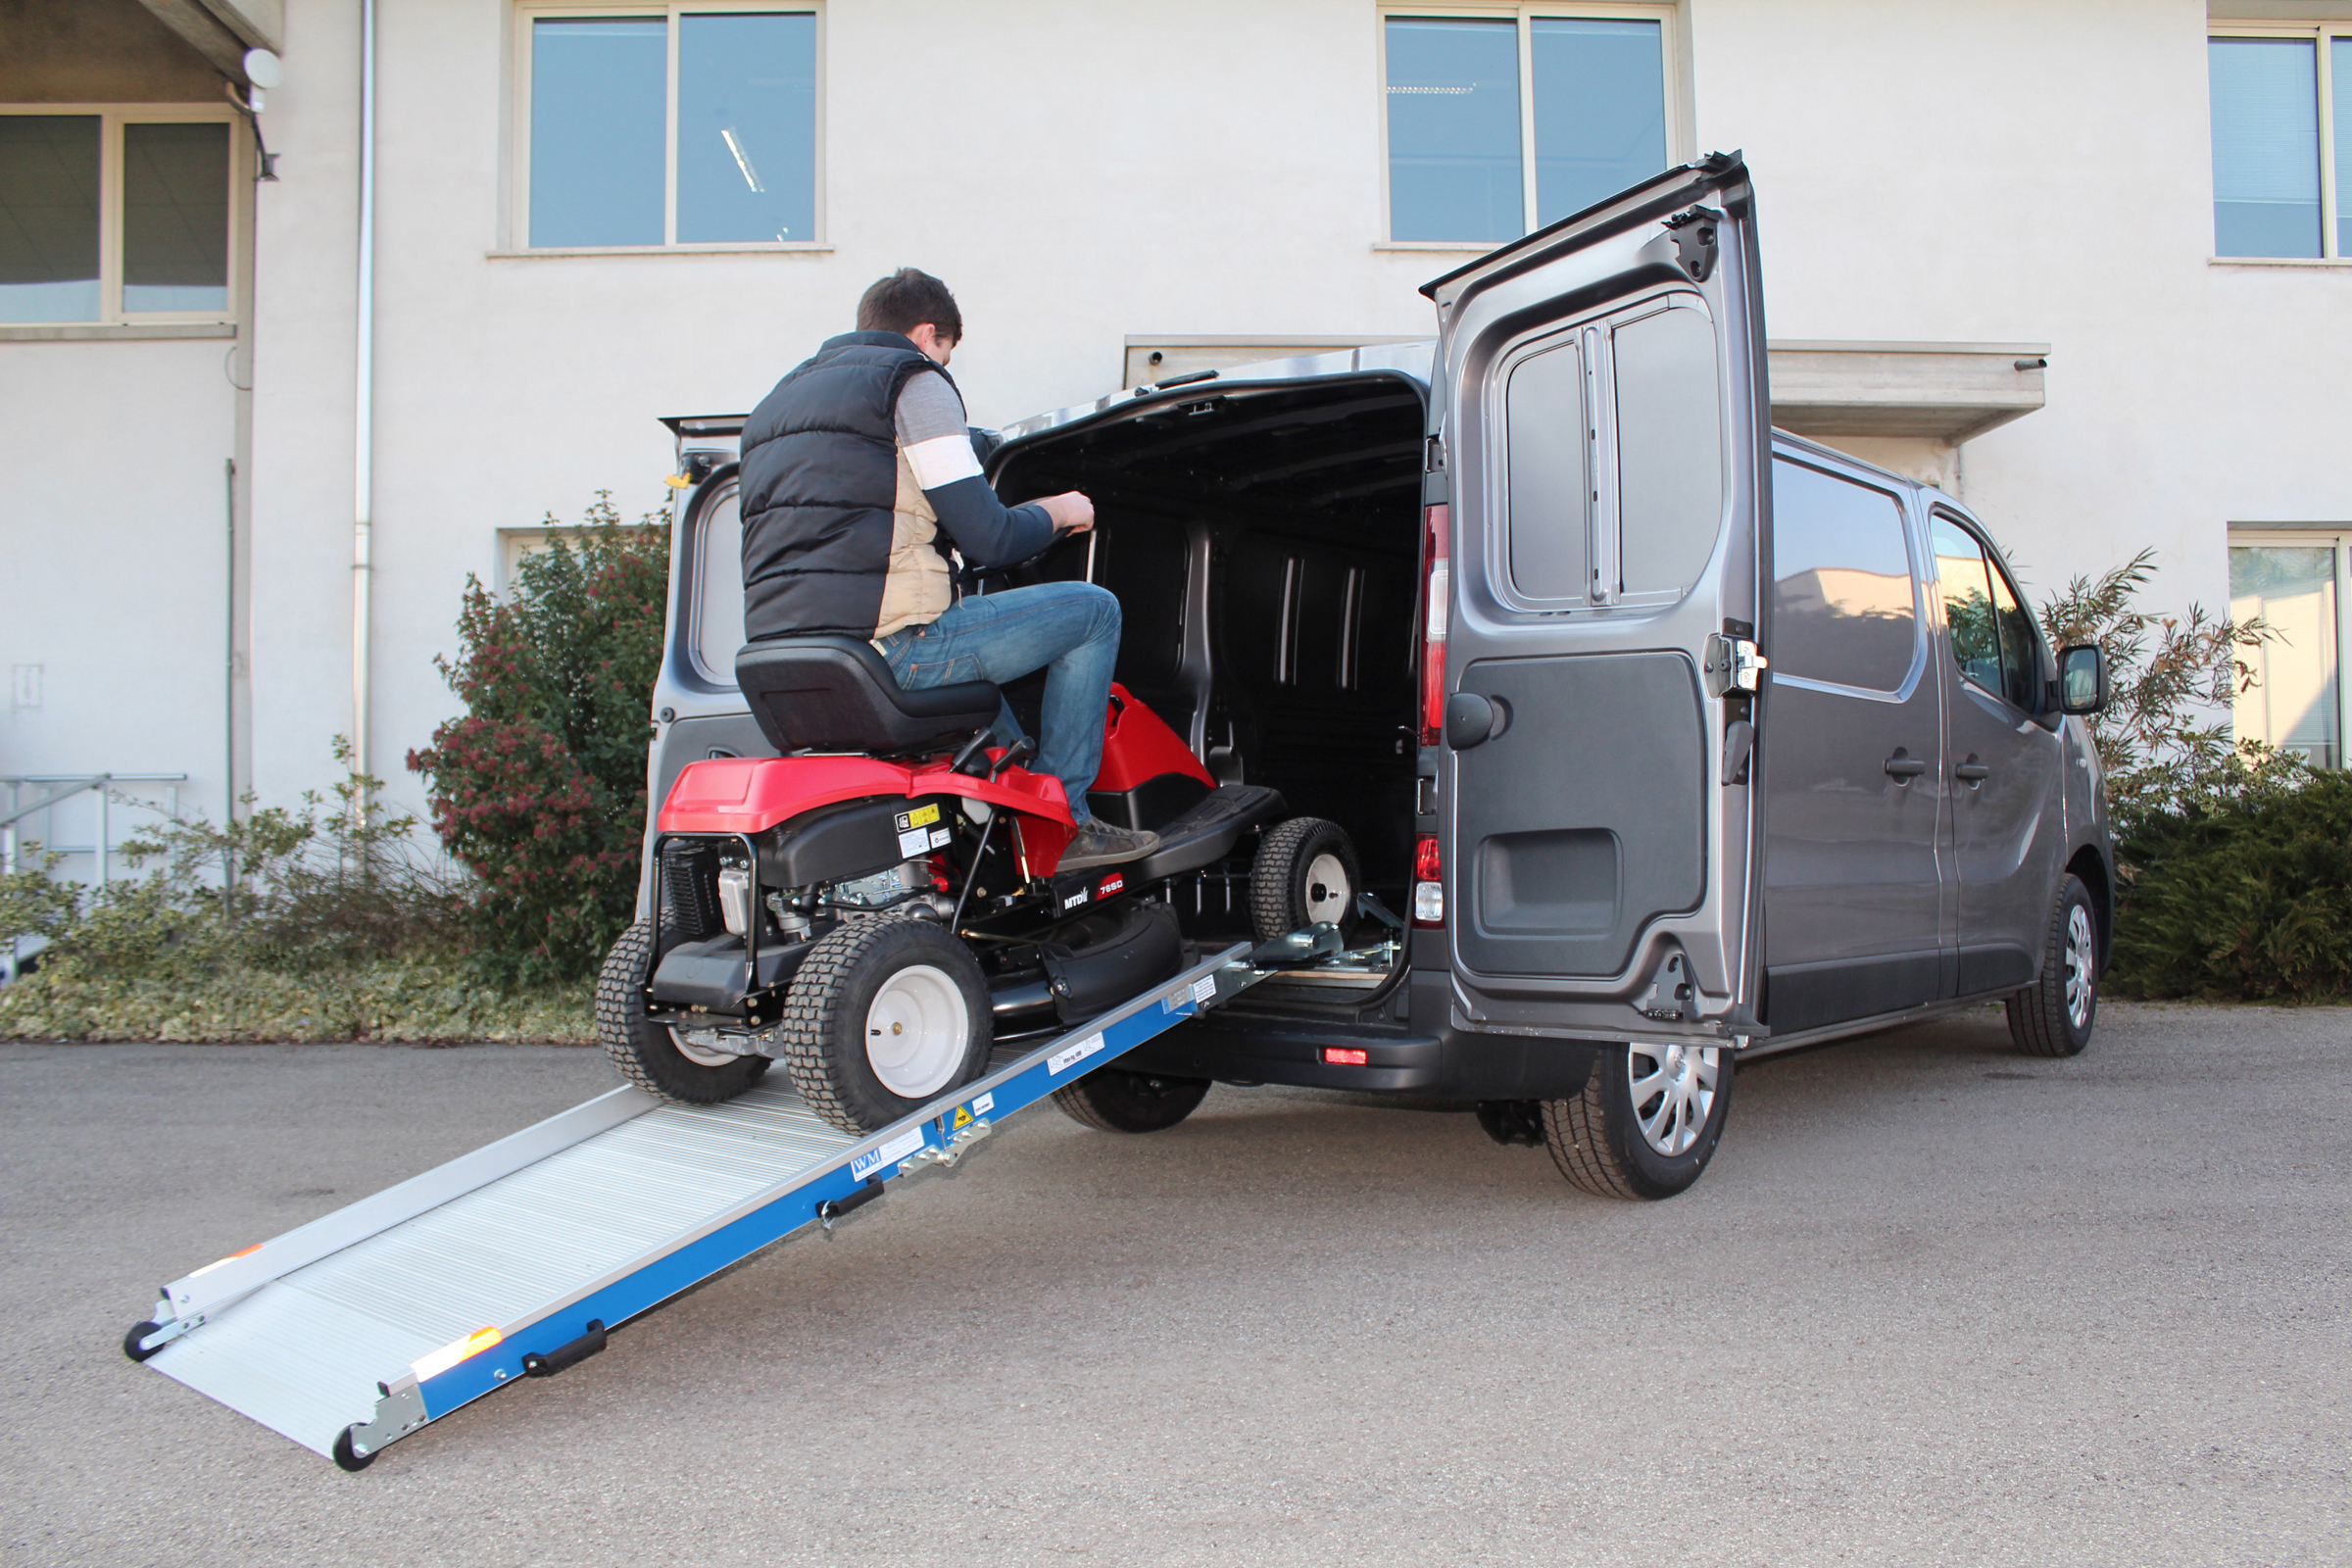 The ramps can be installed in as little as two hours and can handle load capacities of between 880 and 4,000 pounds.